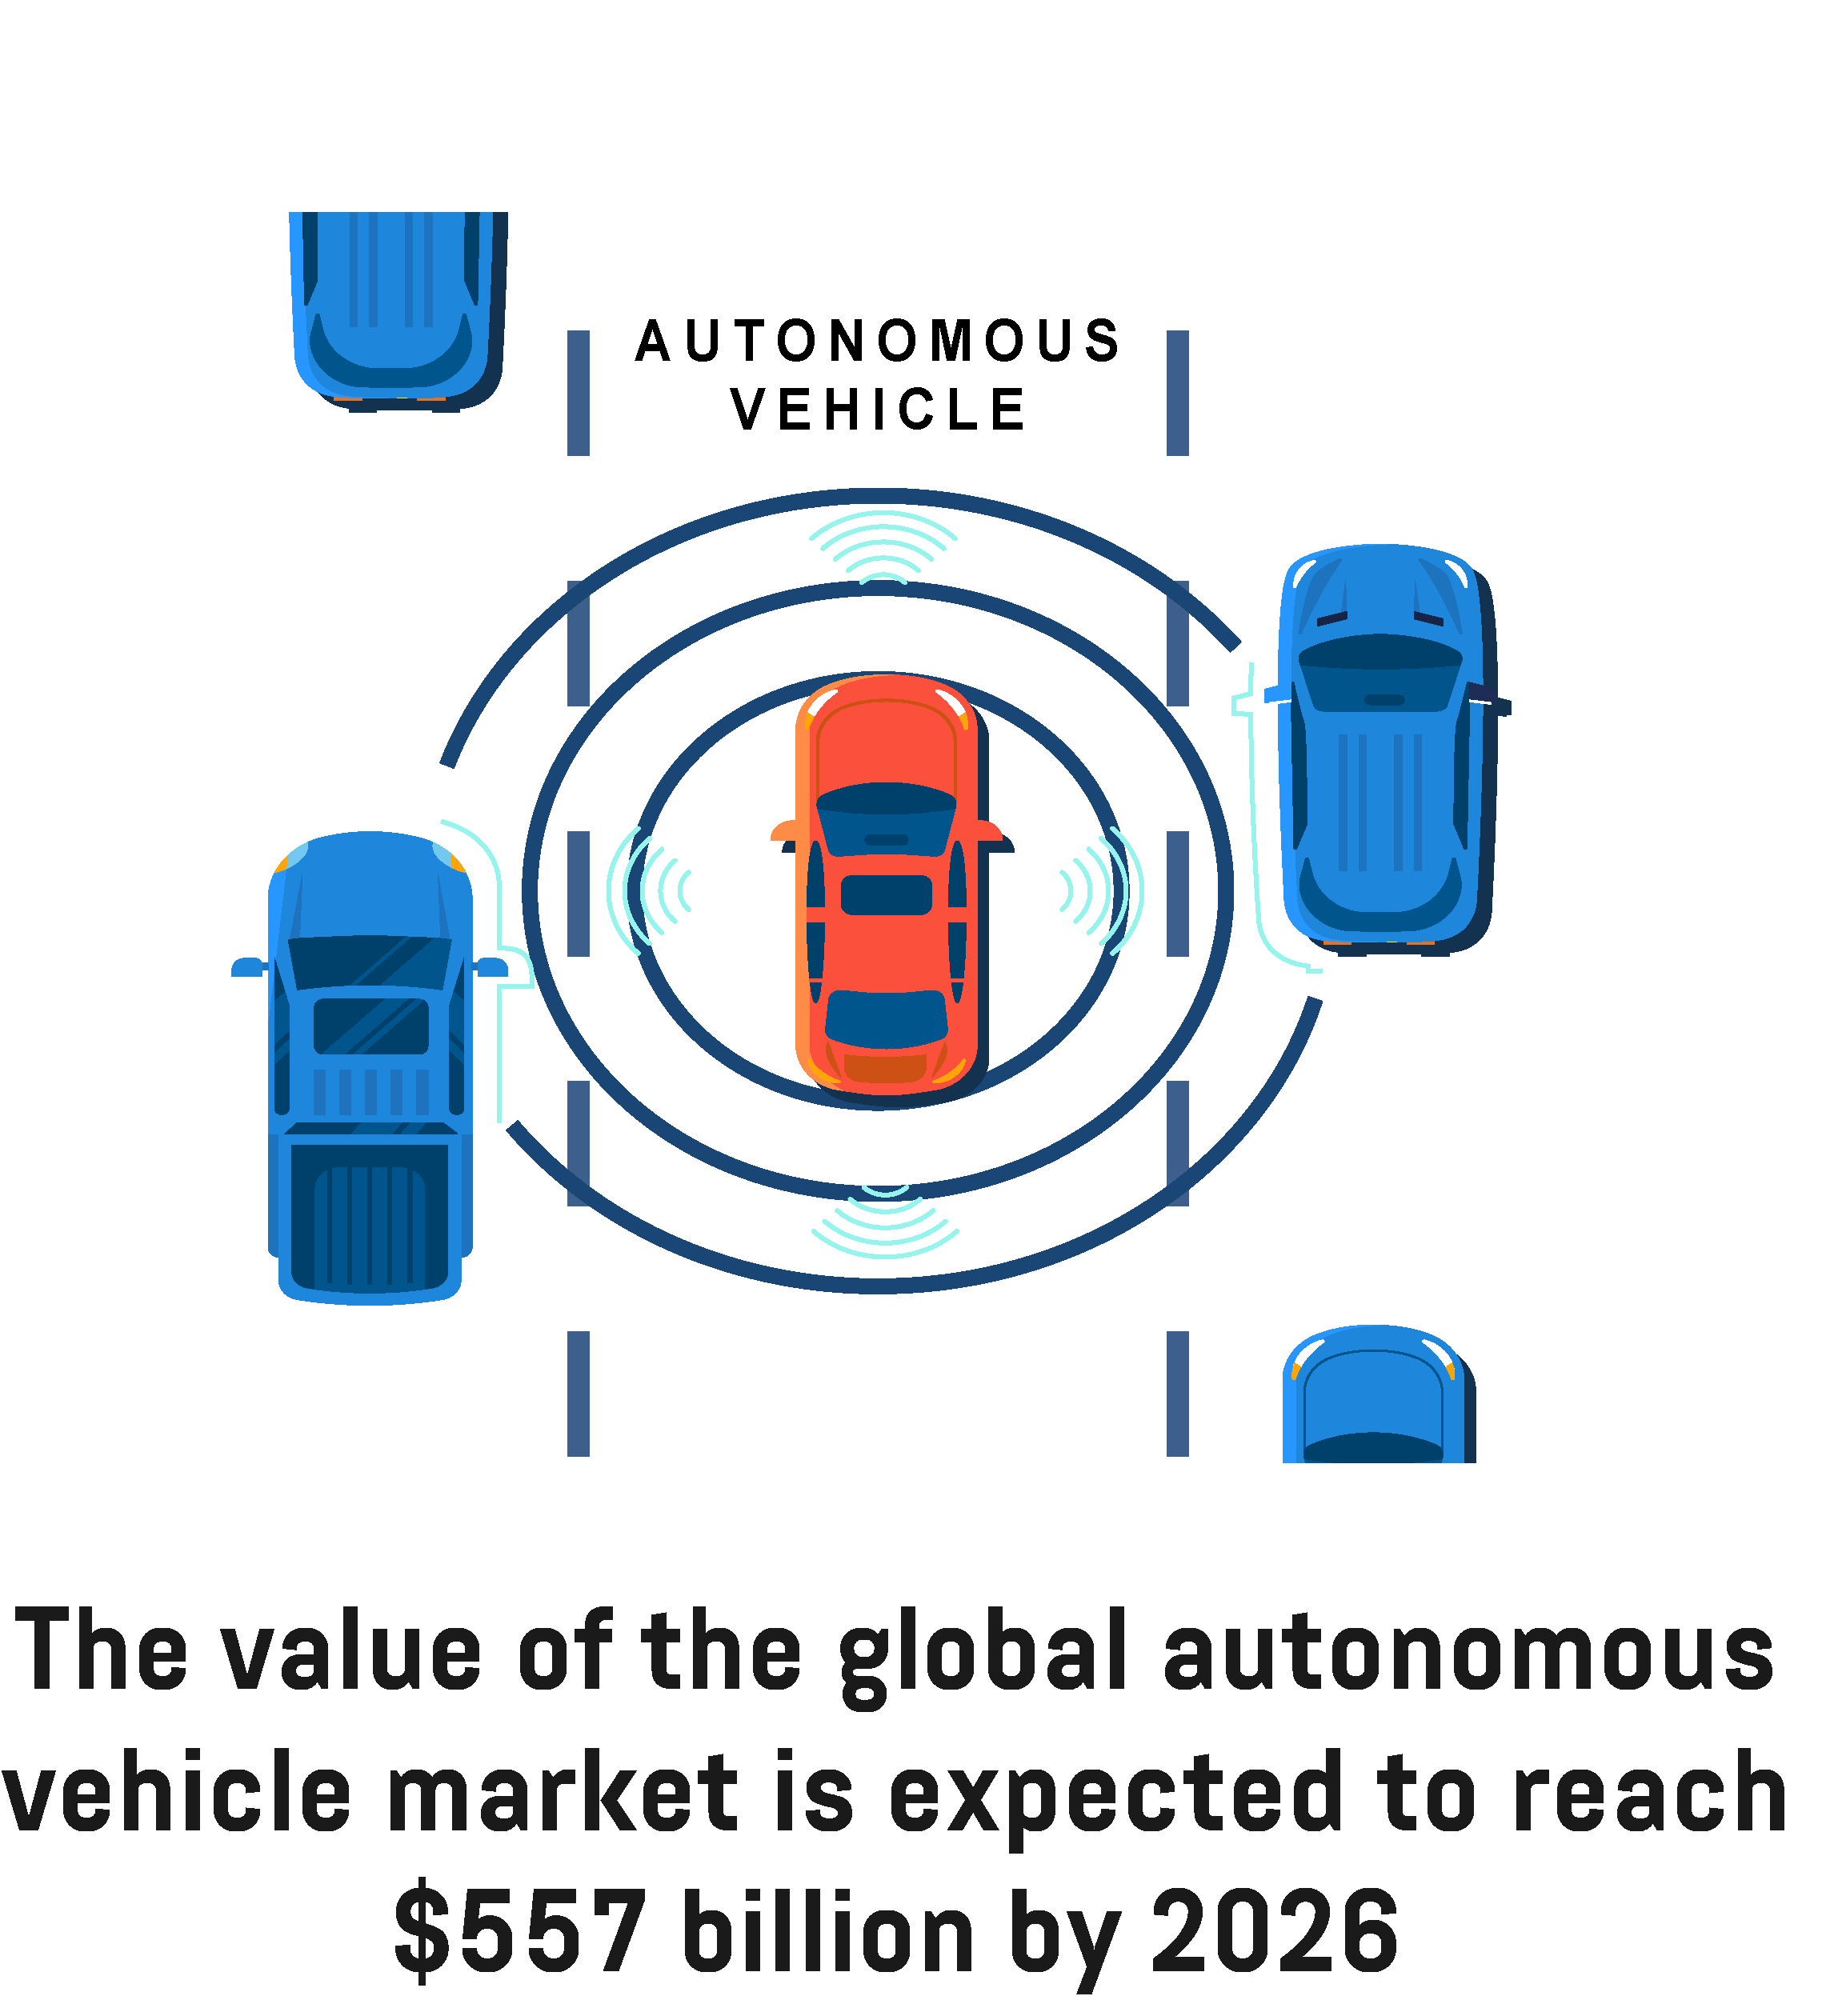  Infographic showing the predicted value of the global autonomous vehicle market by 2026.